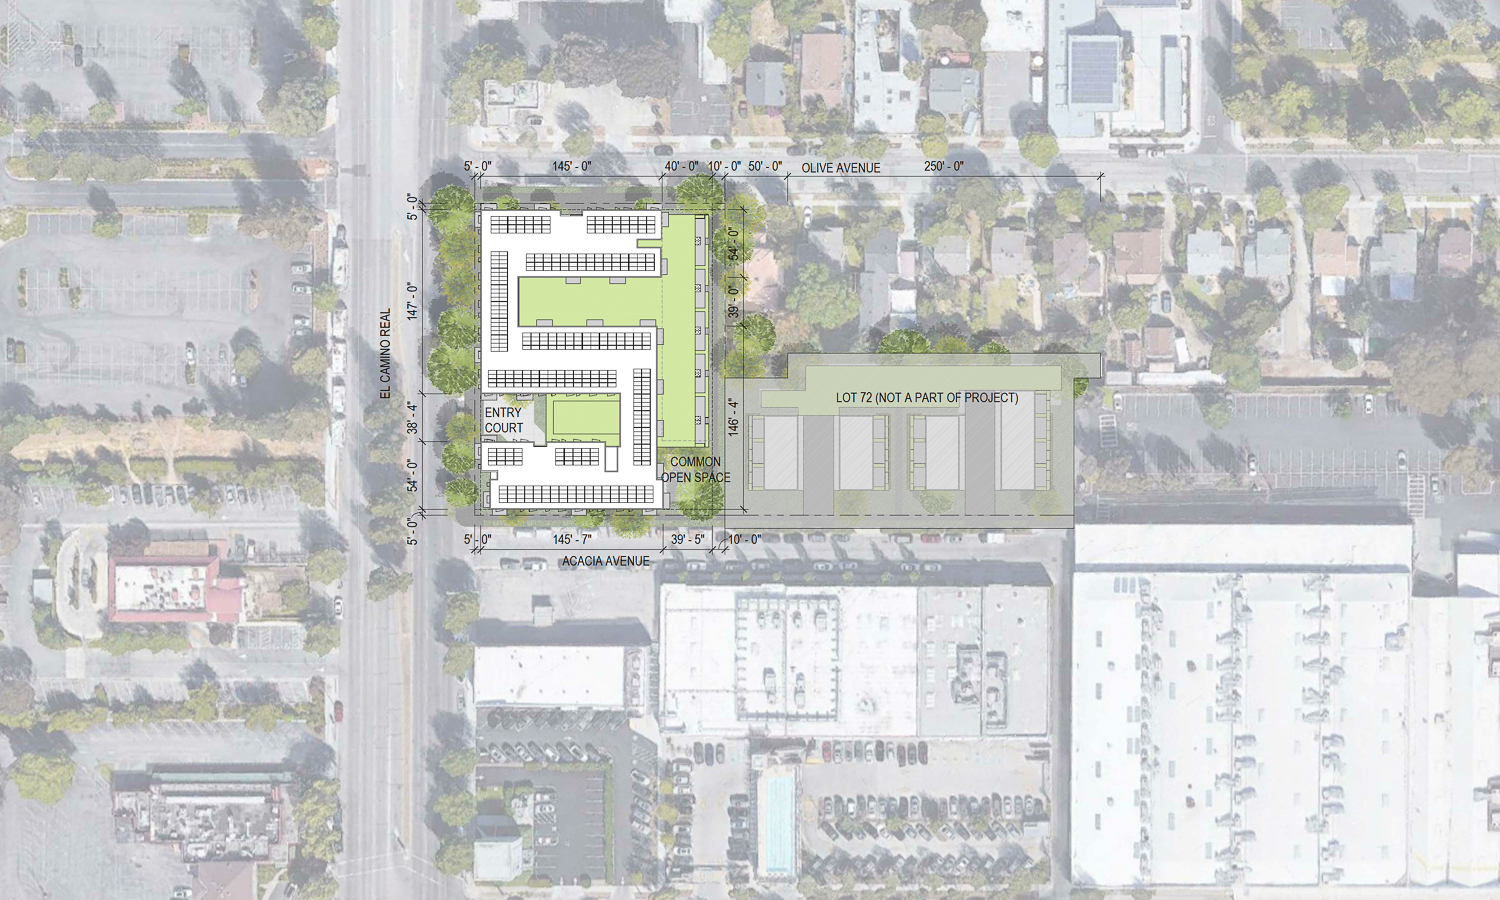 3001 El Camino Real site map in neighborhood context, image by David Baker Architects